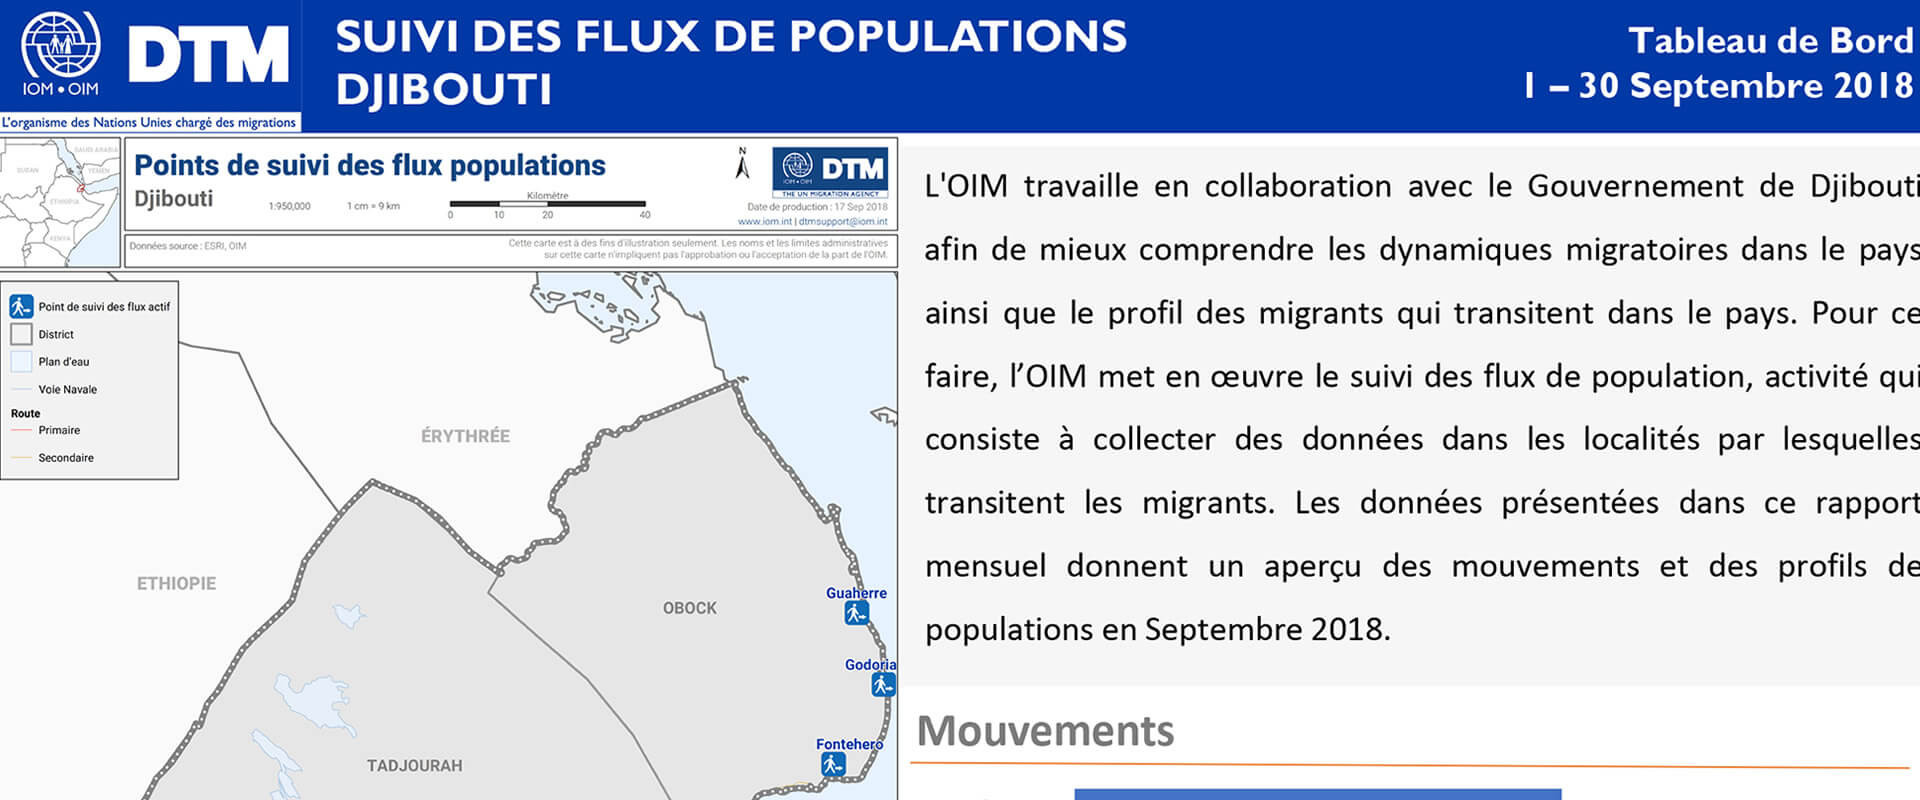 Djibouti - Report on Flow Monitoring Points (September 2018) [French]